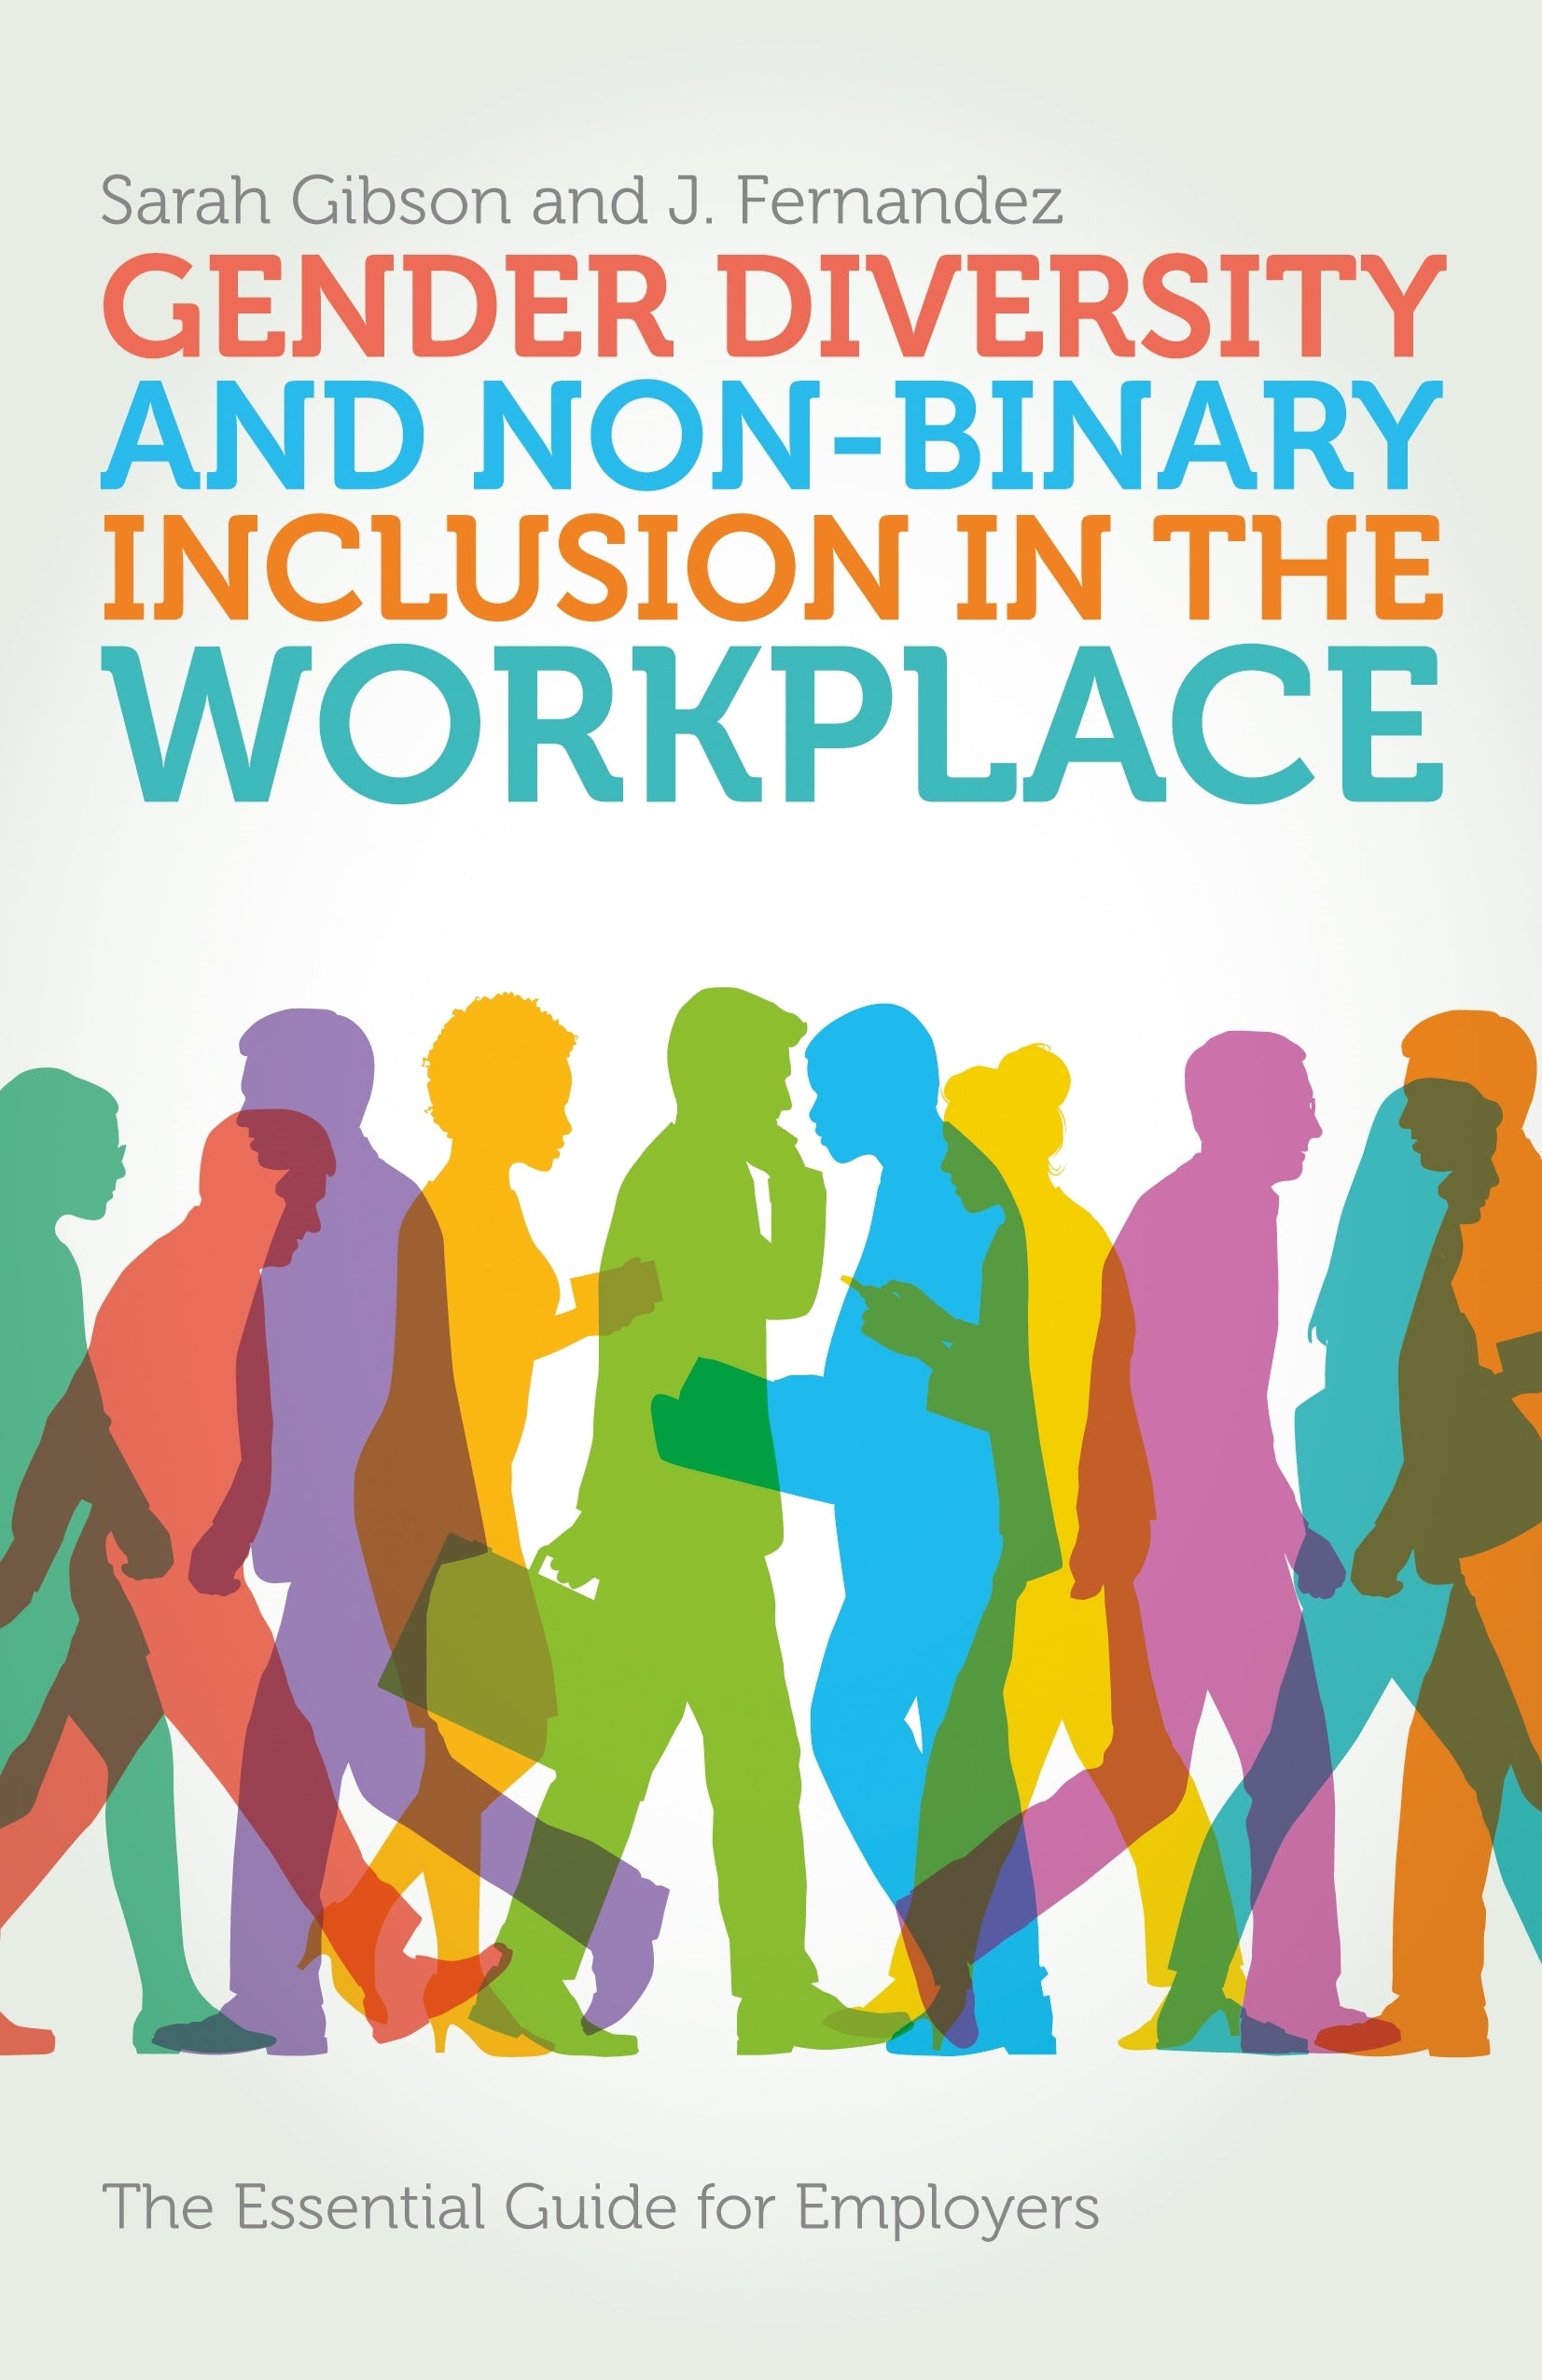 Gender Diversity and Non-Binary Inclusion in the Workplace by Sarah Gibson, J. Fernandez